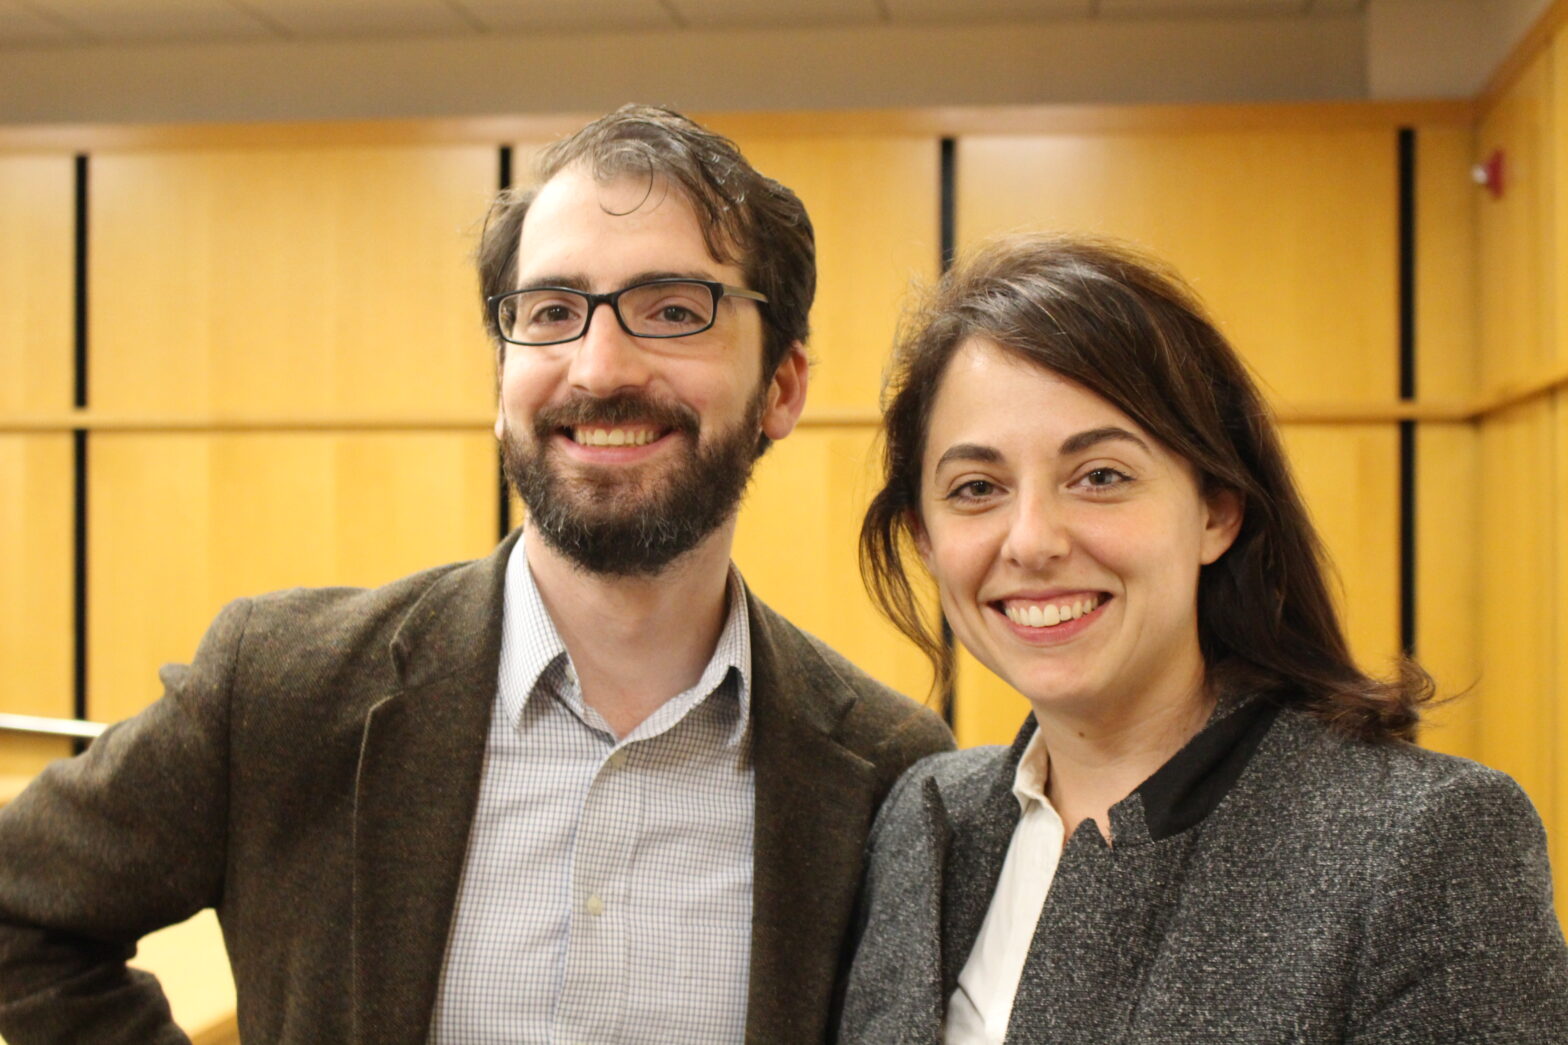 Journalists Annie Karni ’00 and Ben Jacobs ’02 Share Election Insights